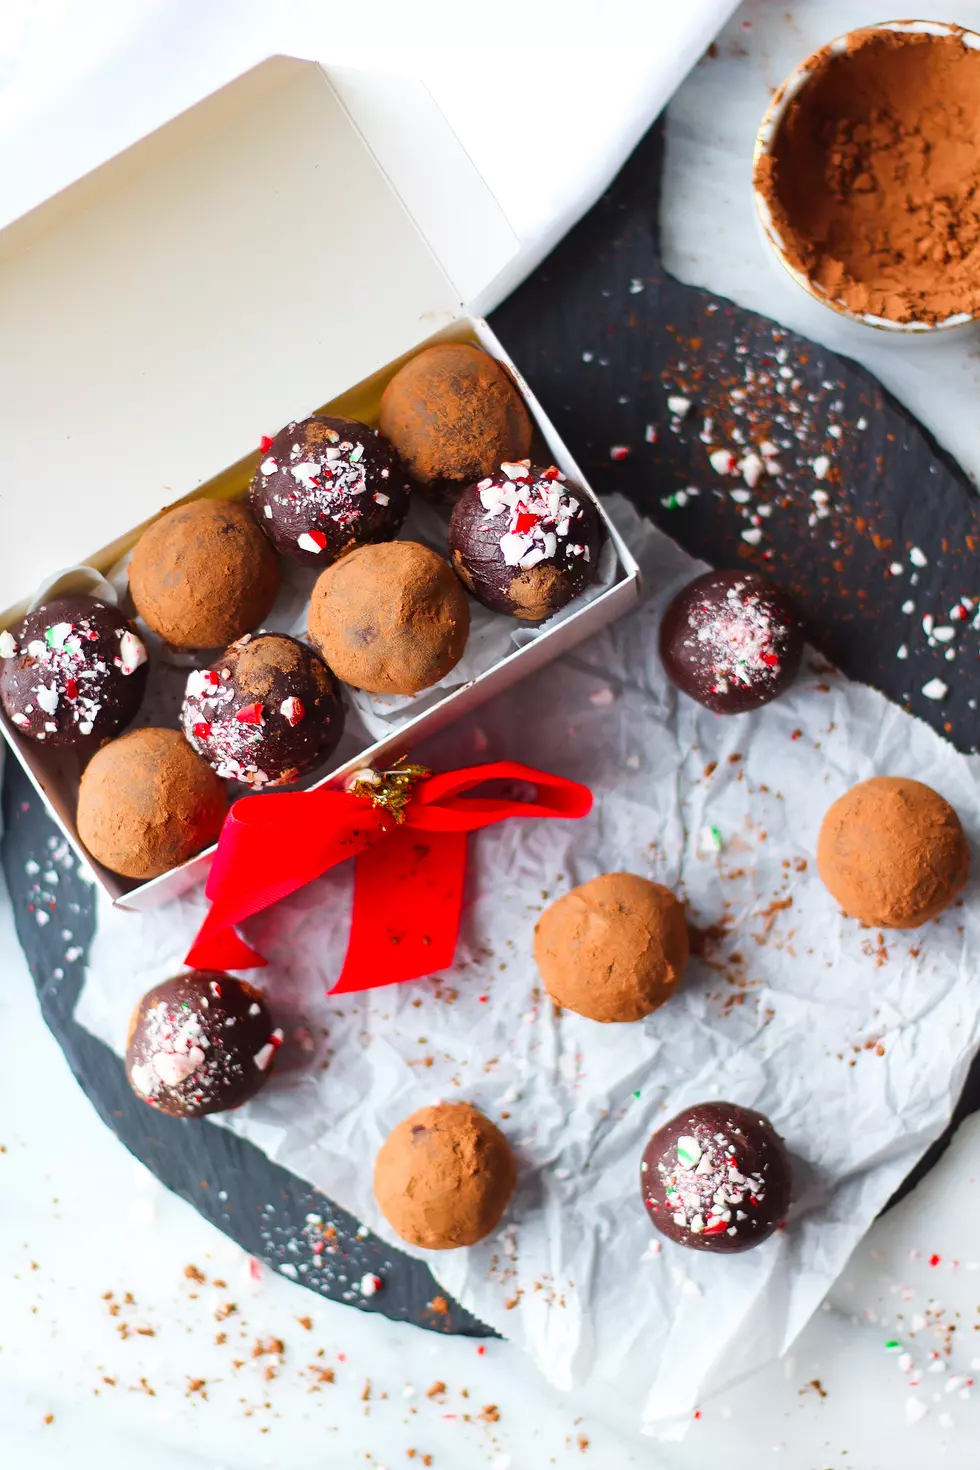 What We’re Cooking this Weekend: Peppermint Chocolate Truffles